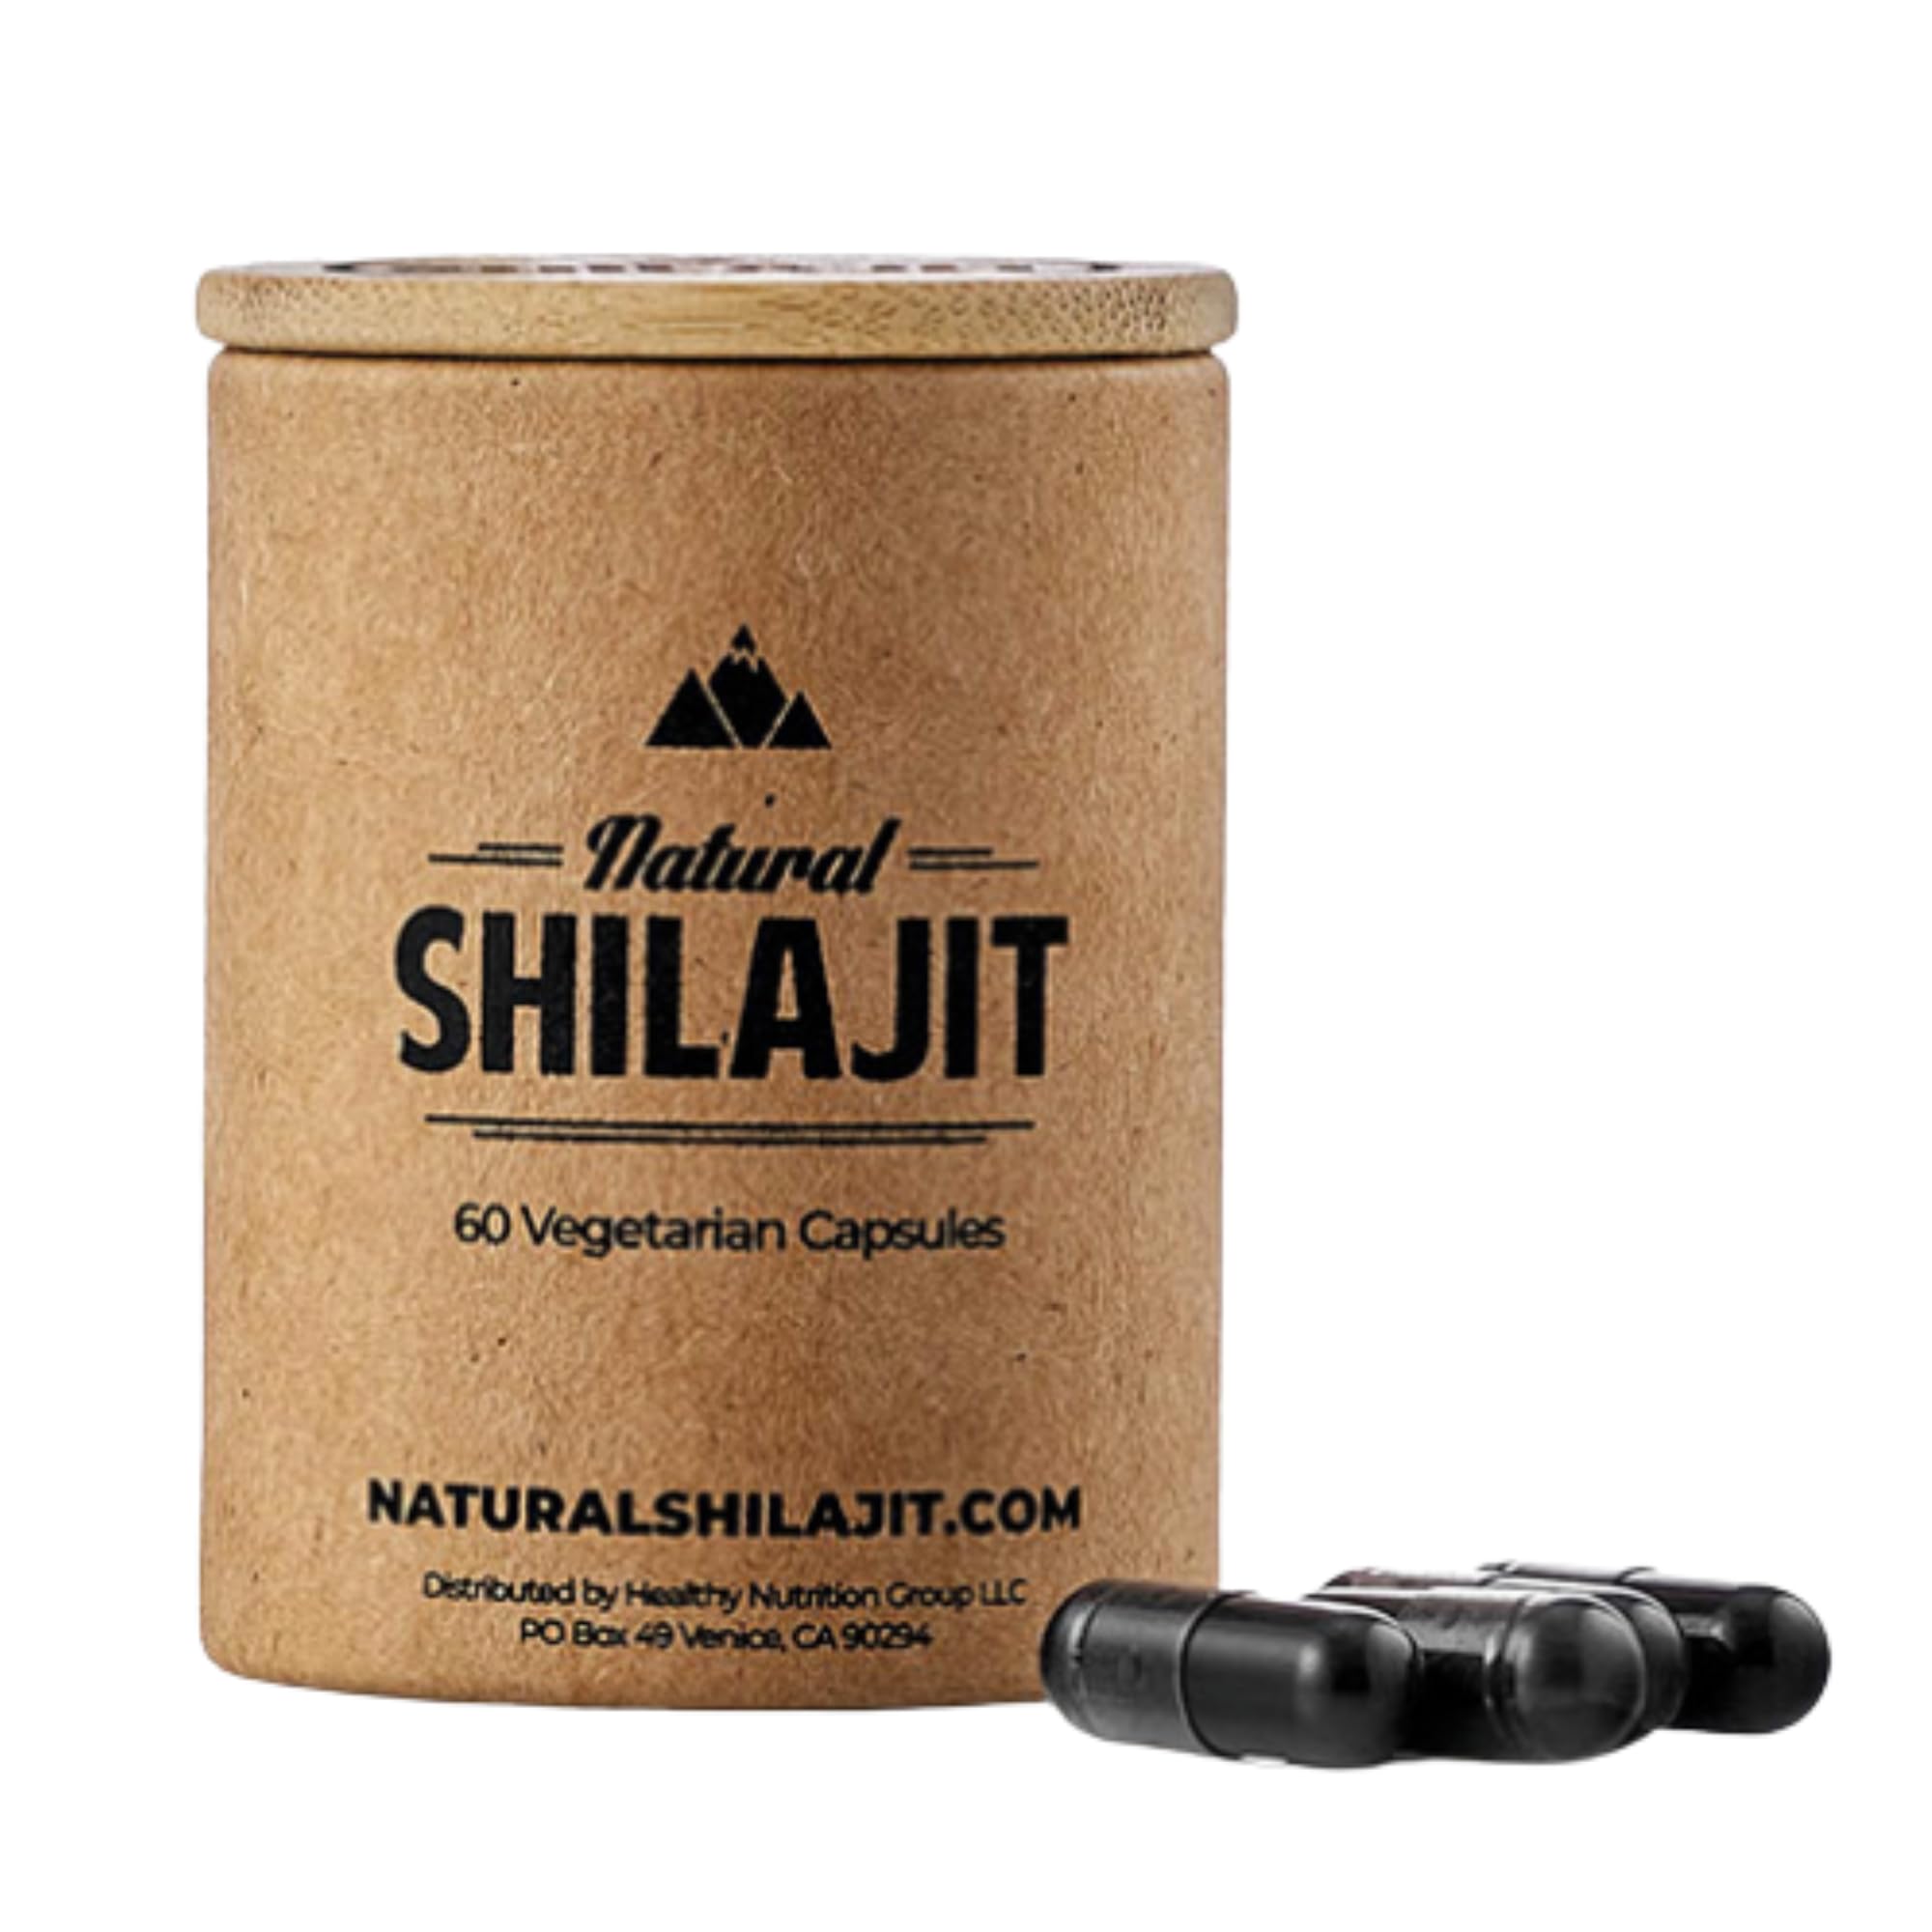 NATURAL SHILAJIT Resin - 10 Gram Shilajit Supplement with Fulvic Acid & Trace Minerals, Plant Based Nutrients Capsules (1-2 Months Supply) - 60 Count - Shilajit Supplement